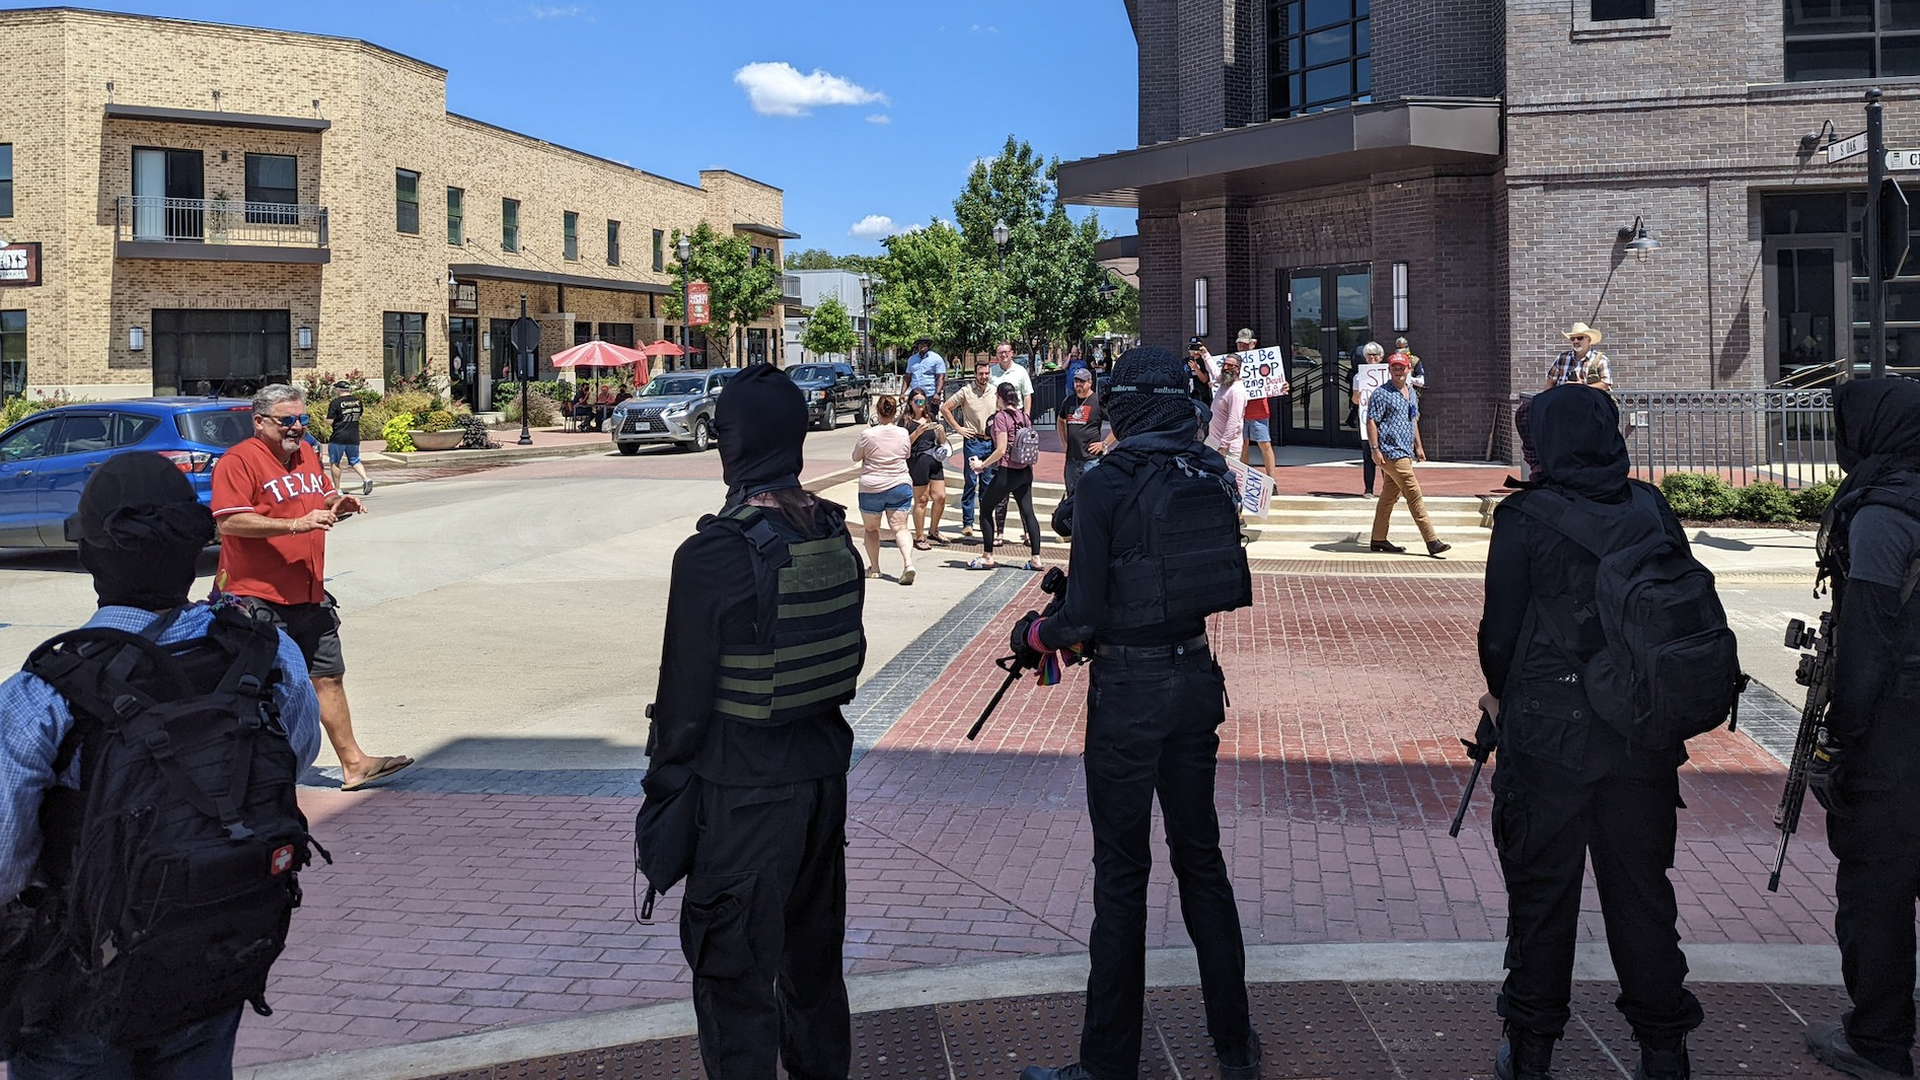 Armed counter-protesters face protesters